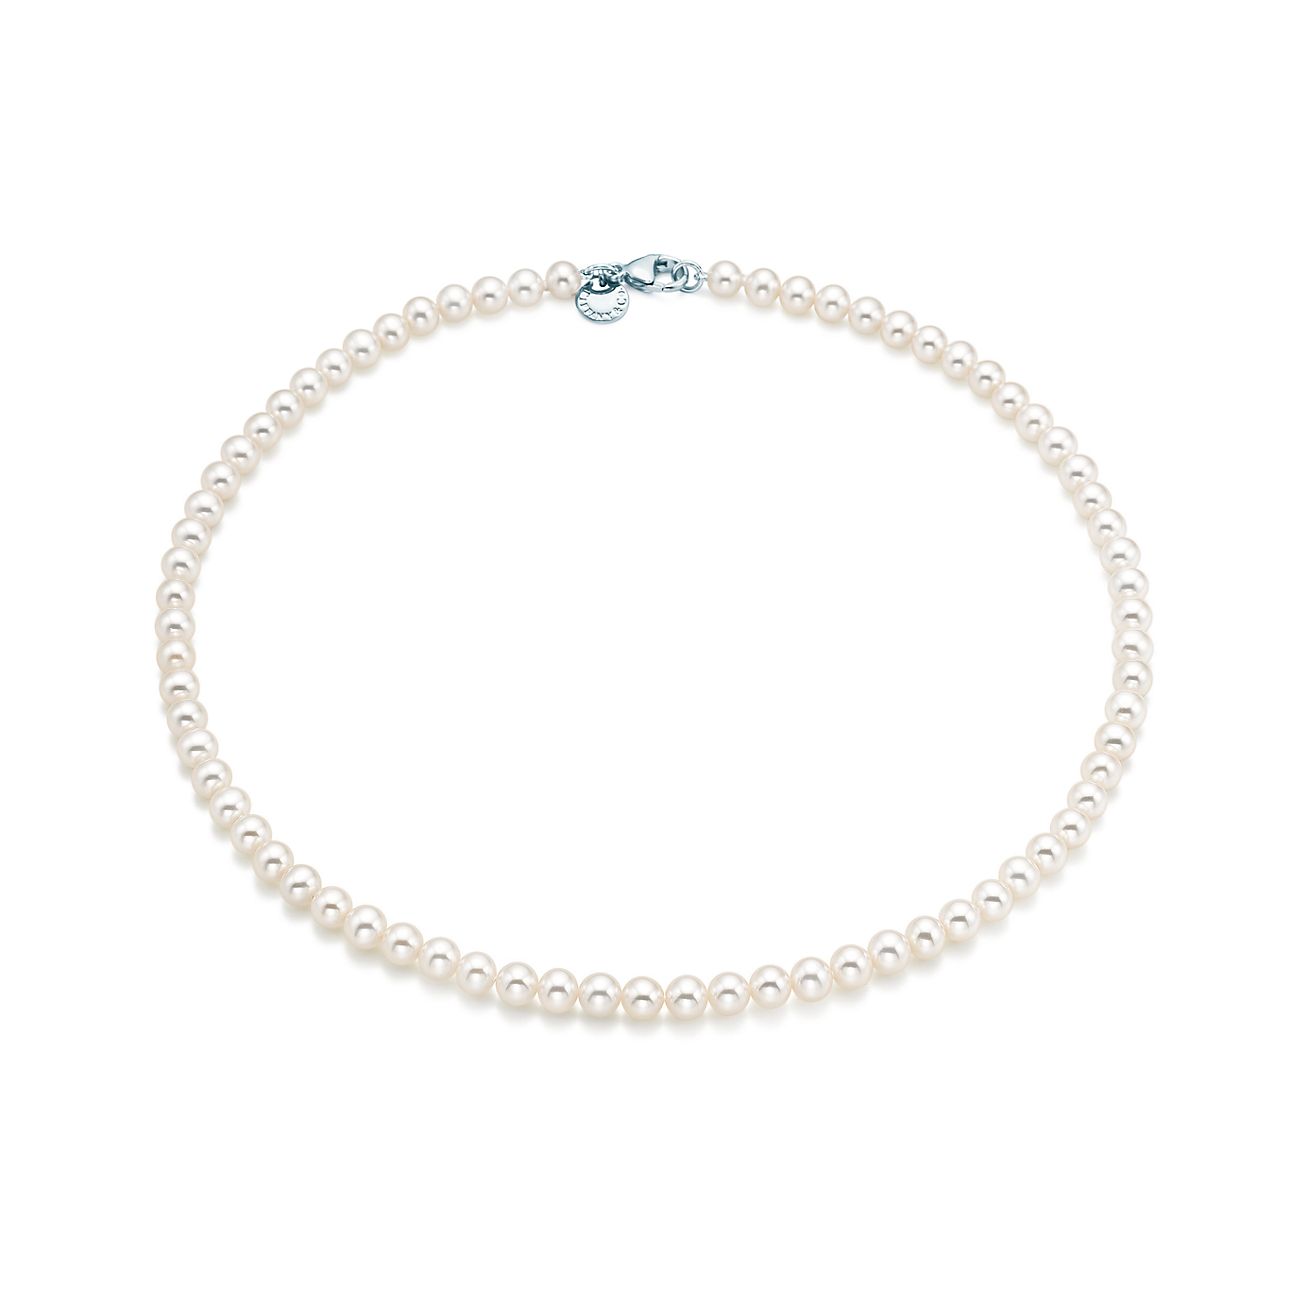 Ziegfeld CollectionPearl Necklace
with a Silver Clasp, 5-6 mm